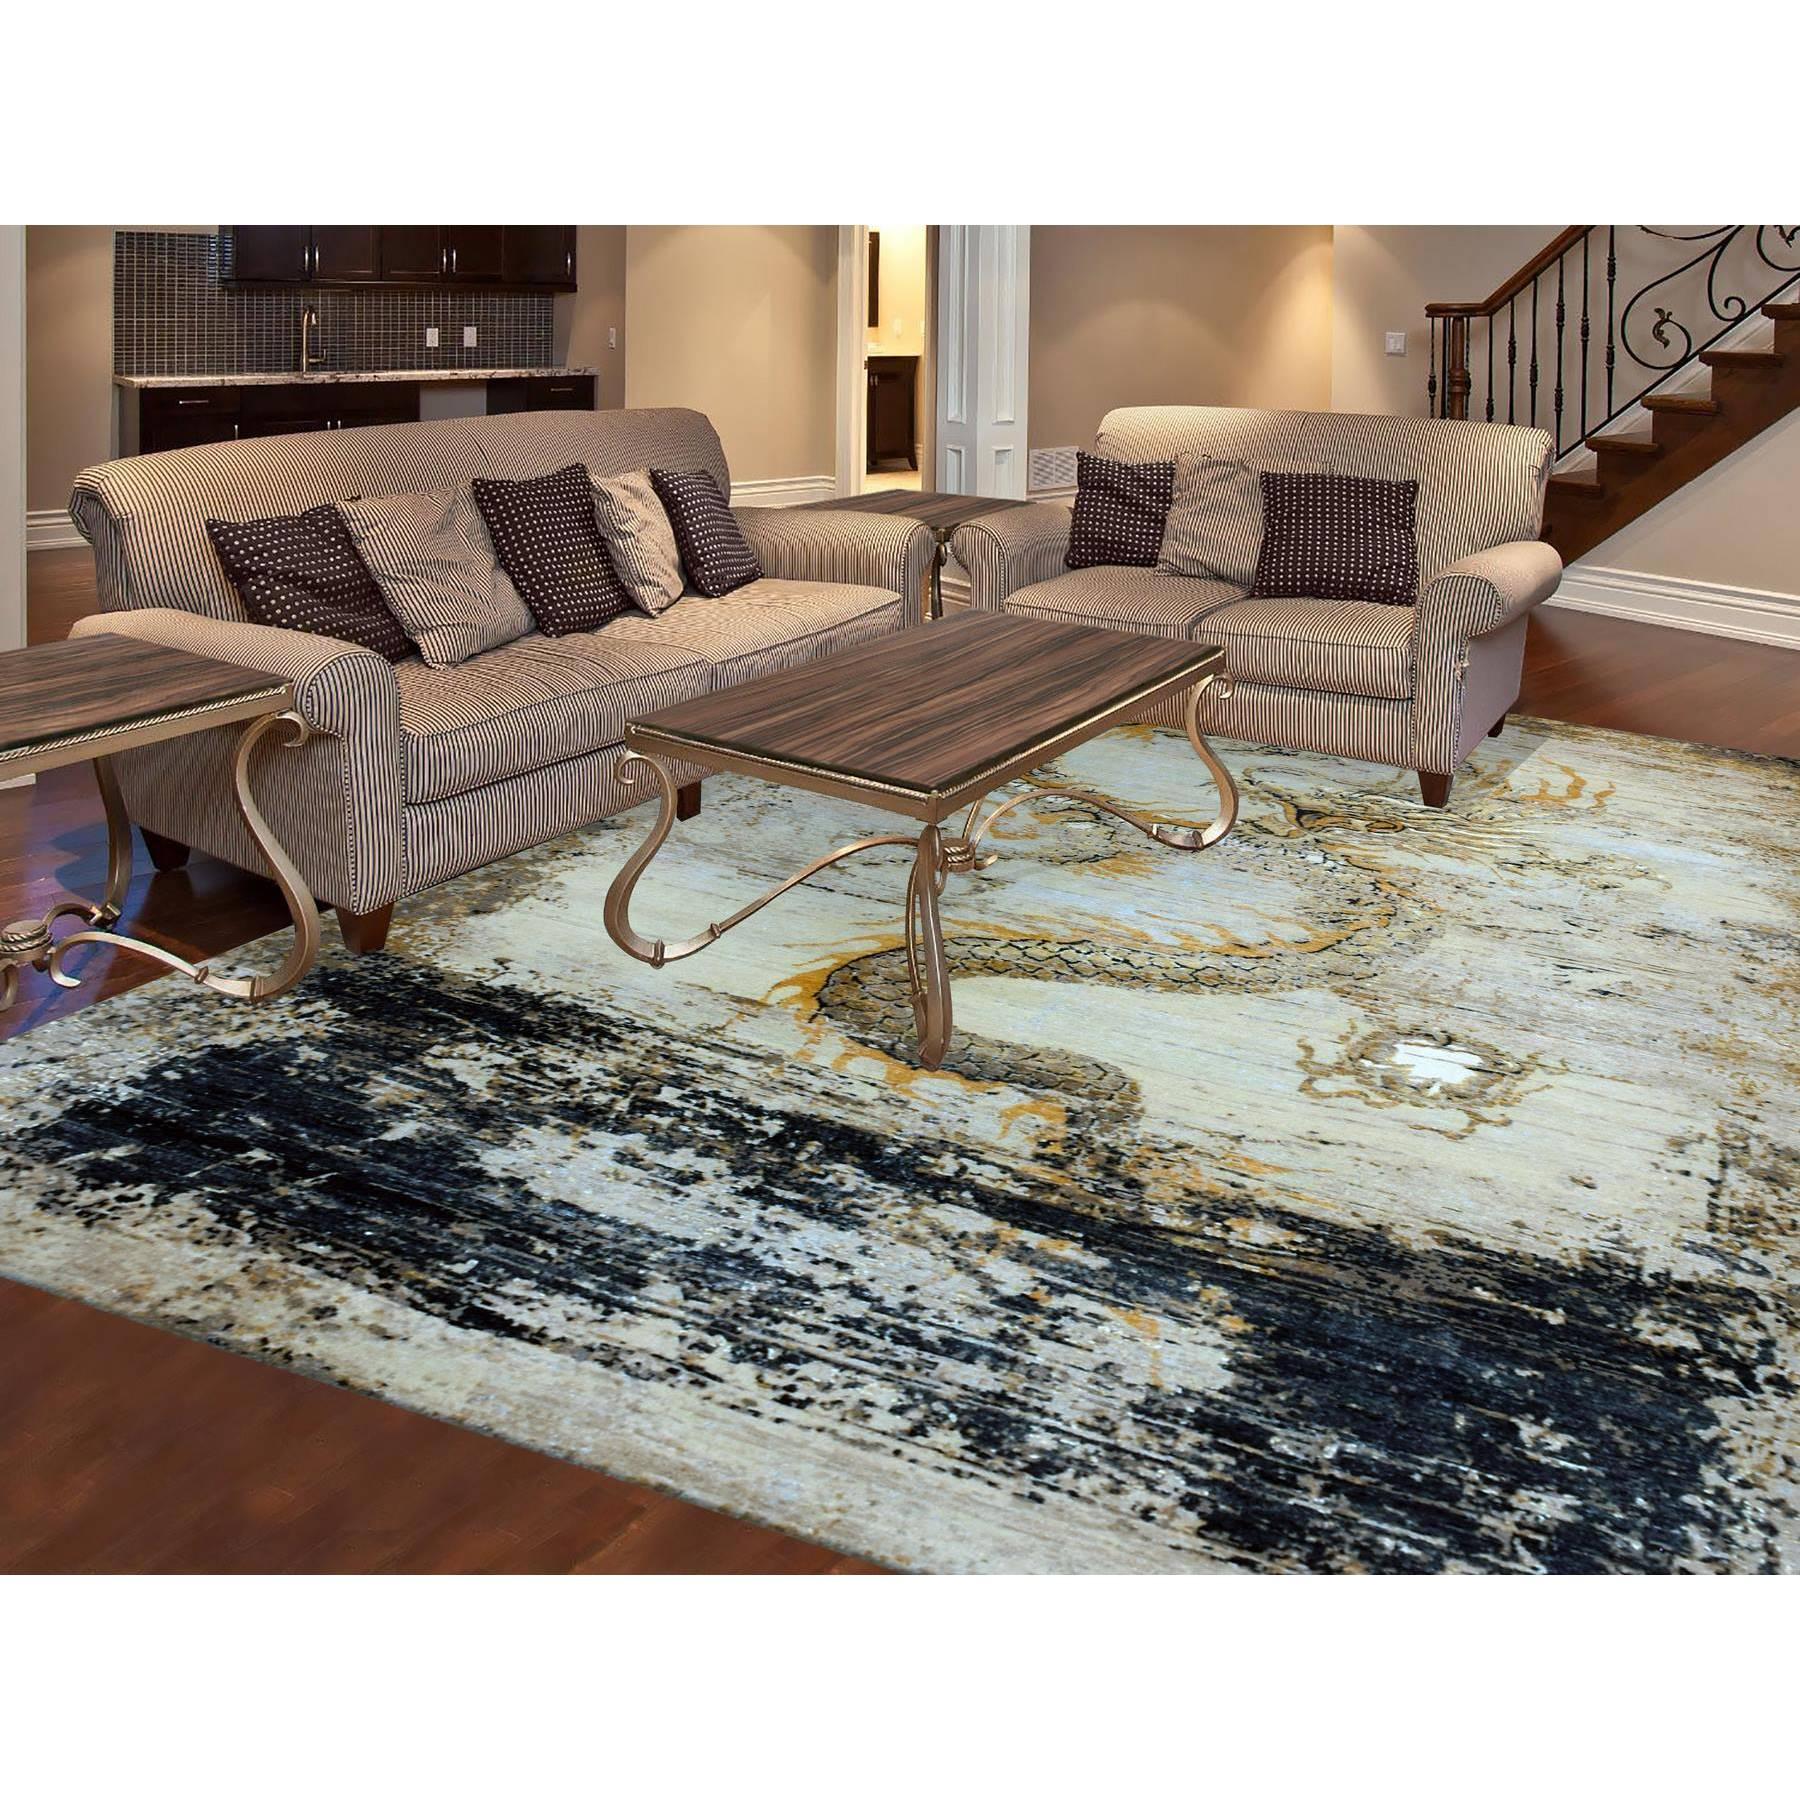 This fabulous Hand-Knotted carpet has been created and designed for extra strength and durability. This rug has been handcrafted for weeks in the traditional method that is used to make
Exact Rug Size in Feet and Inches : 8' x 10'4